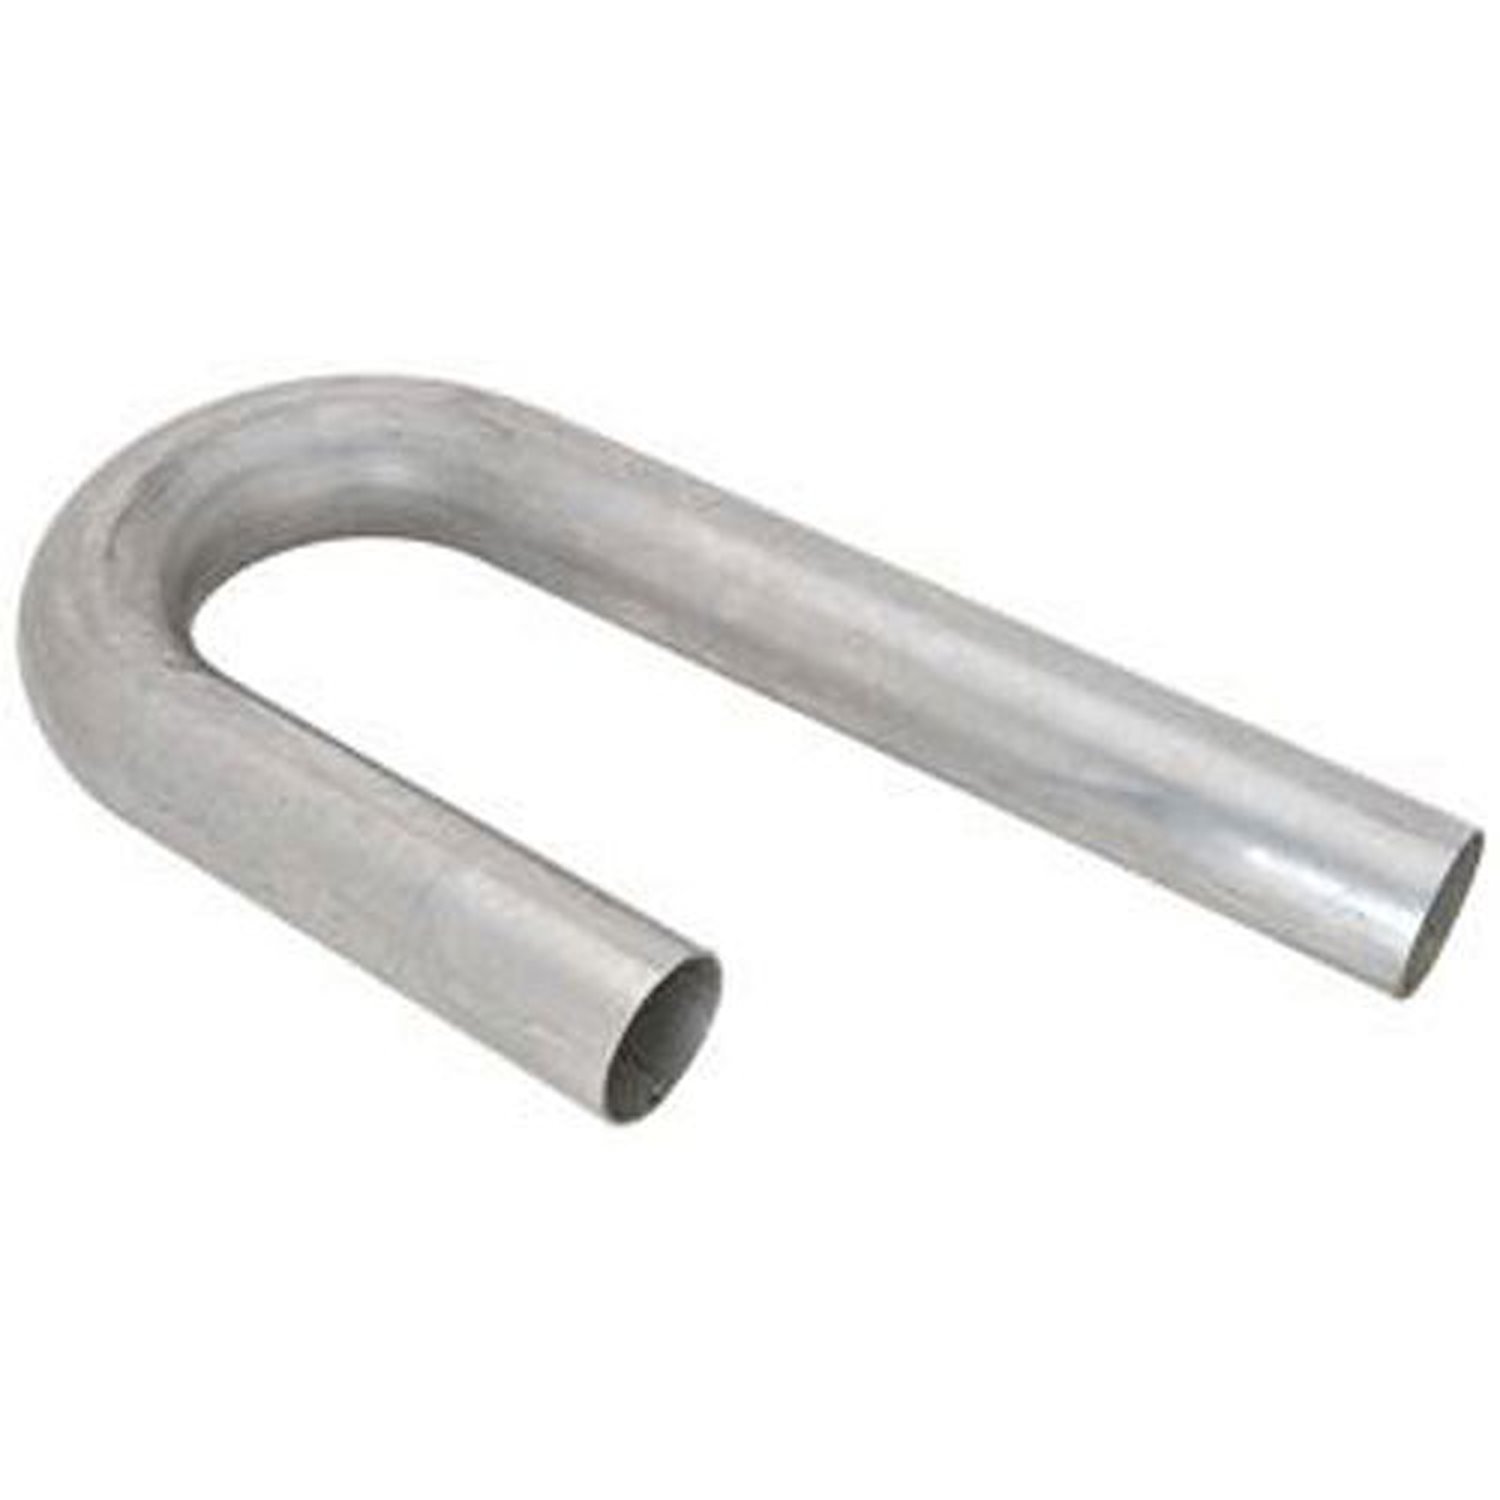 Stainless Steel 2-1/4" J-Bend